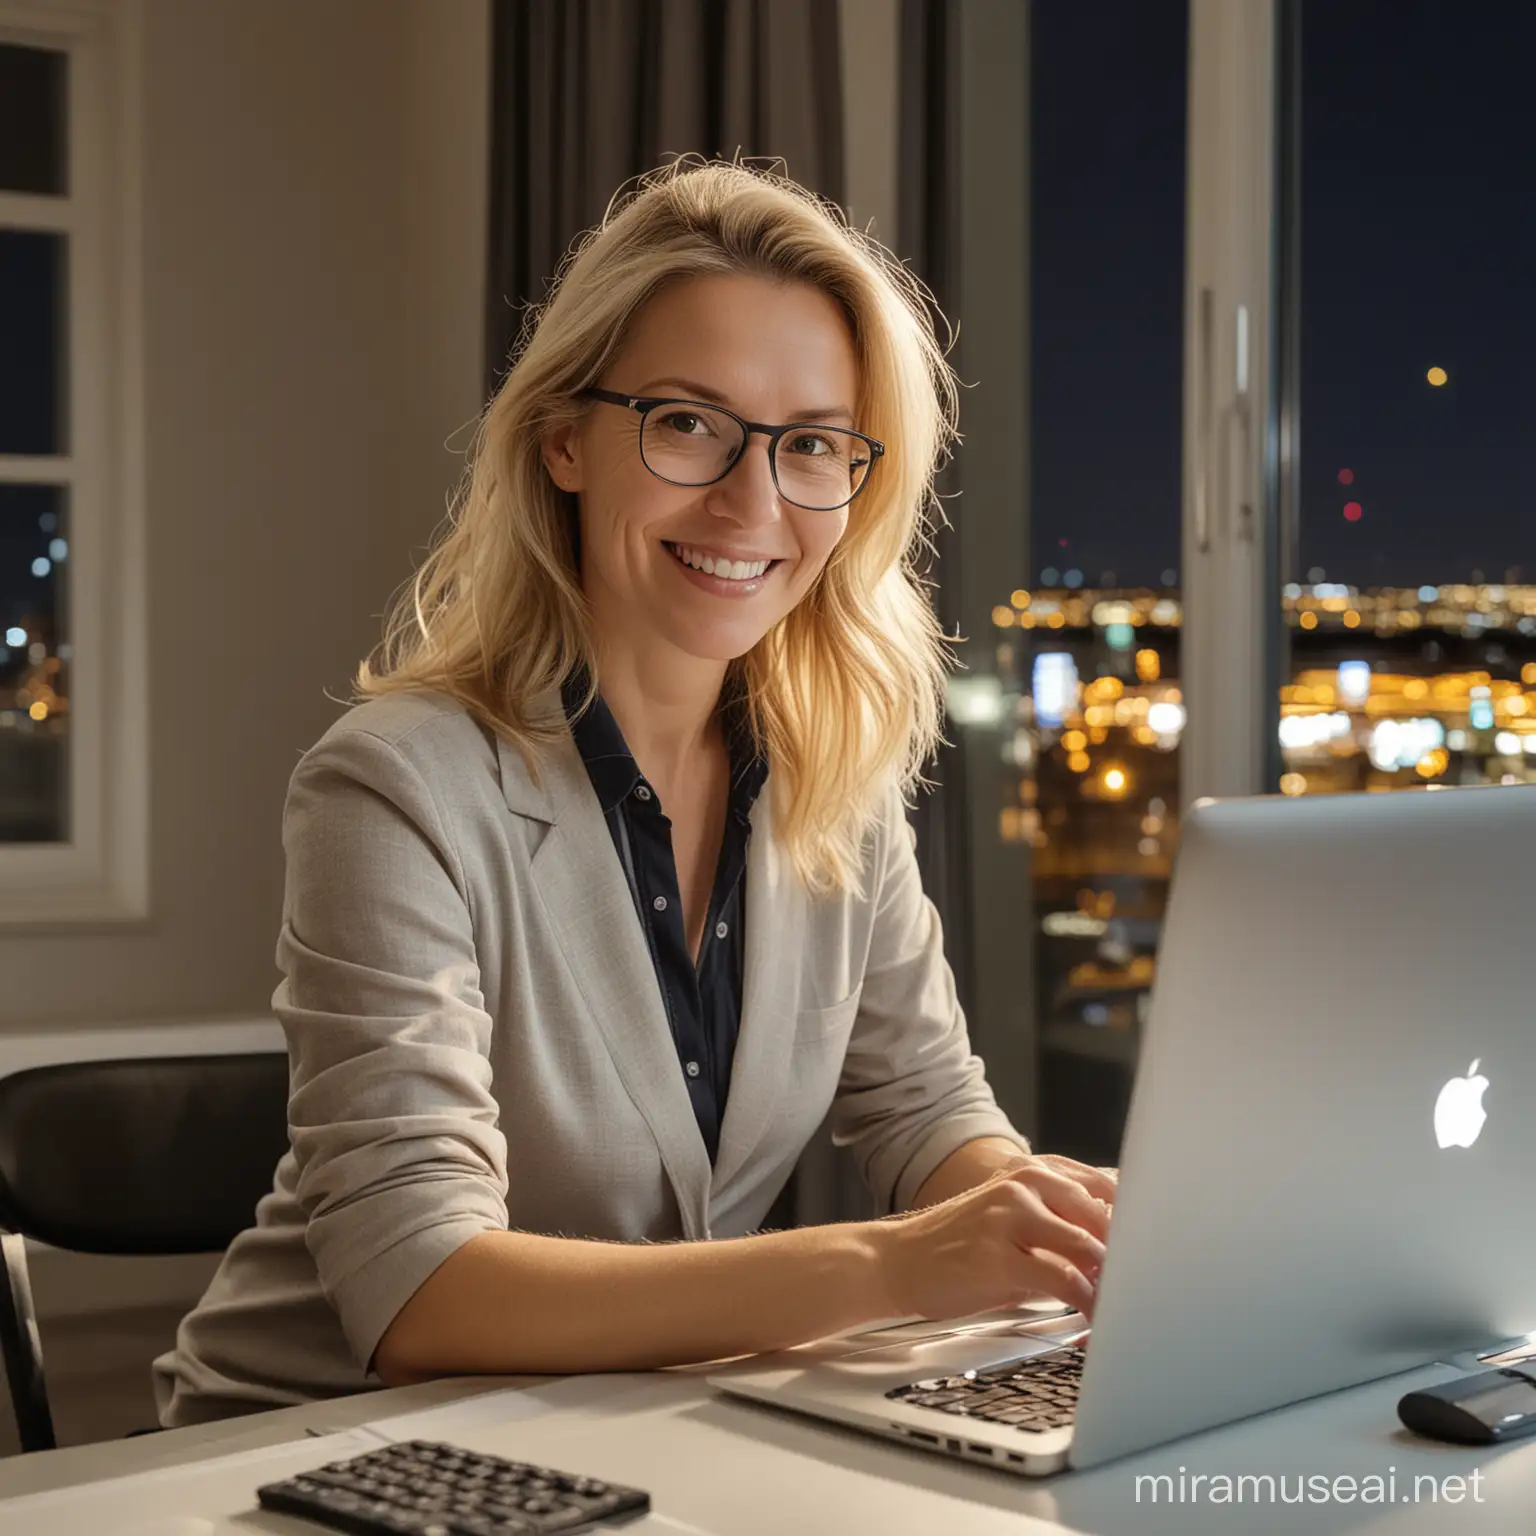 Smart Woman Coding at Night with Helsinki Town View